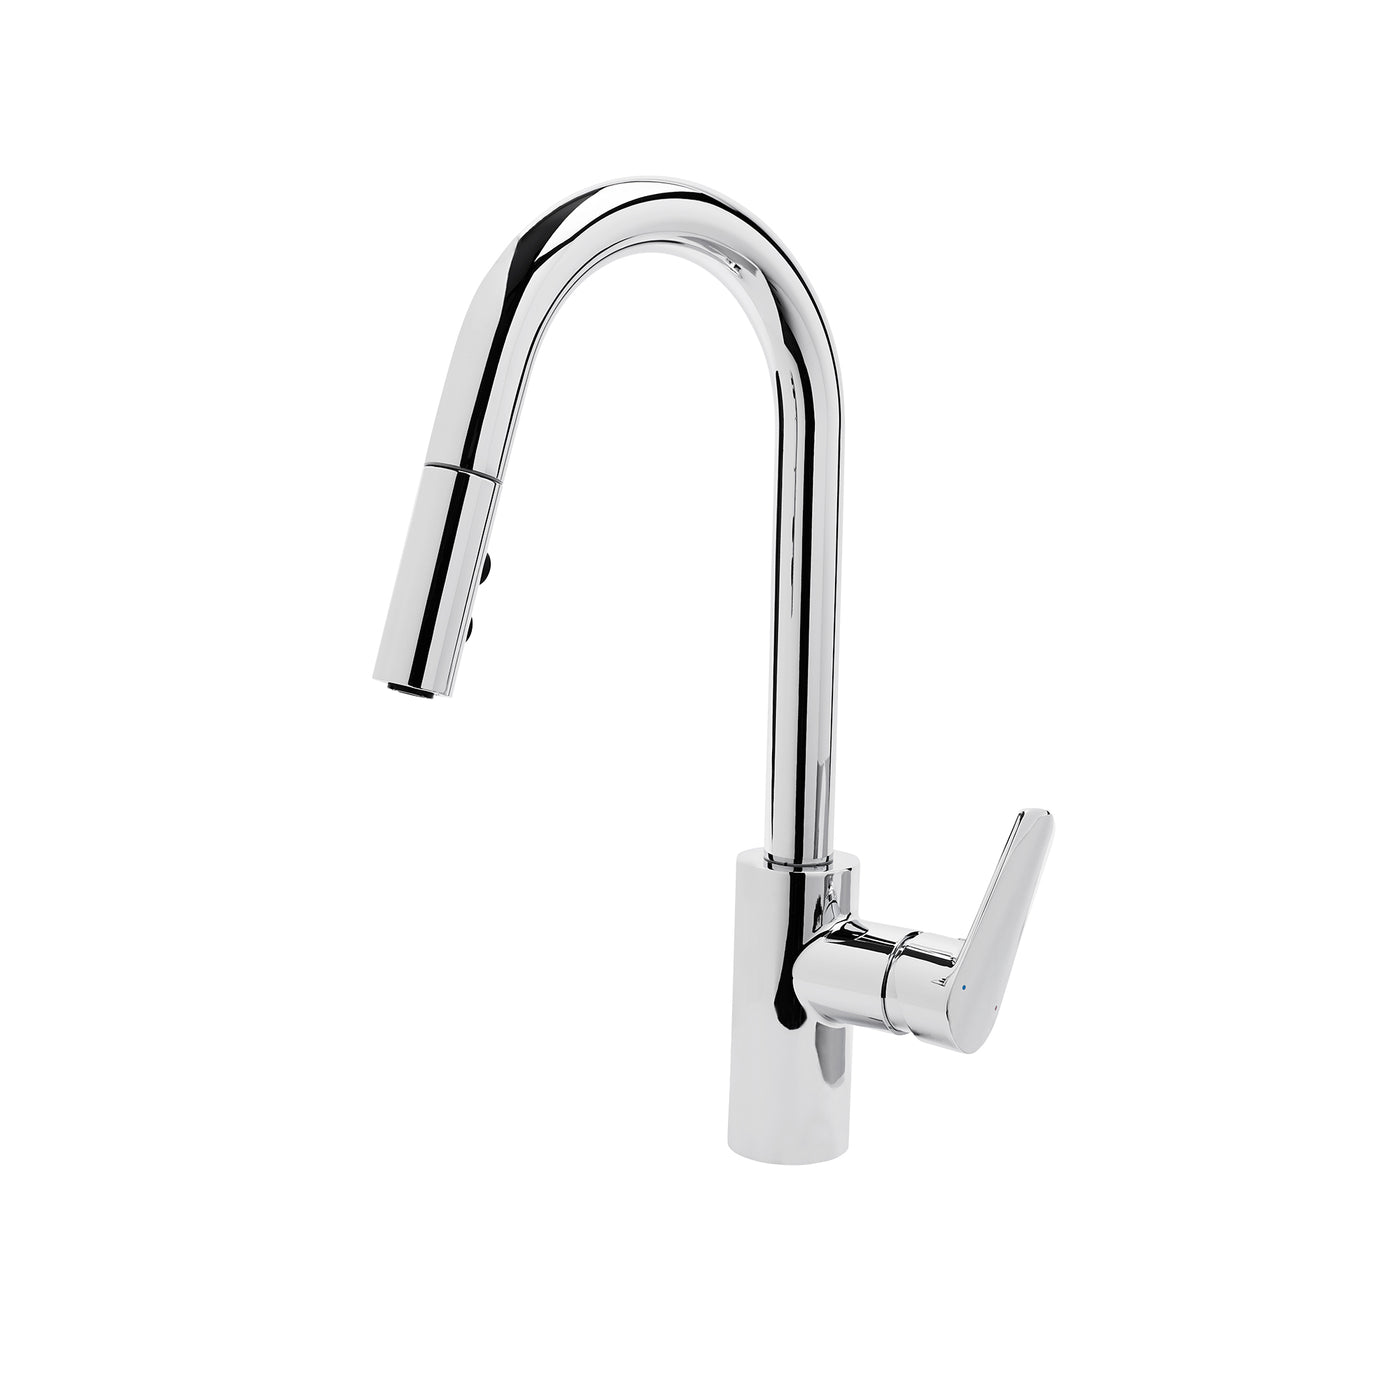 Solus Single Handle Pull-Down Kitchen Faucet Chrome